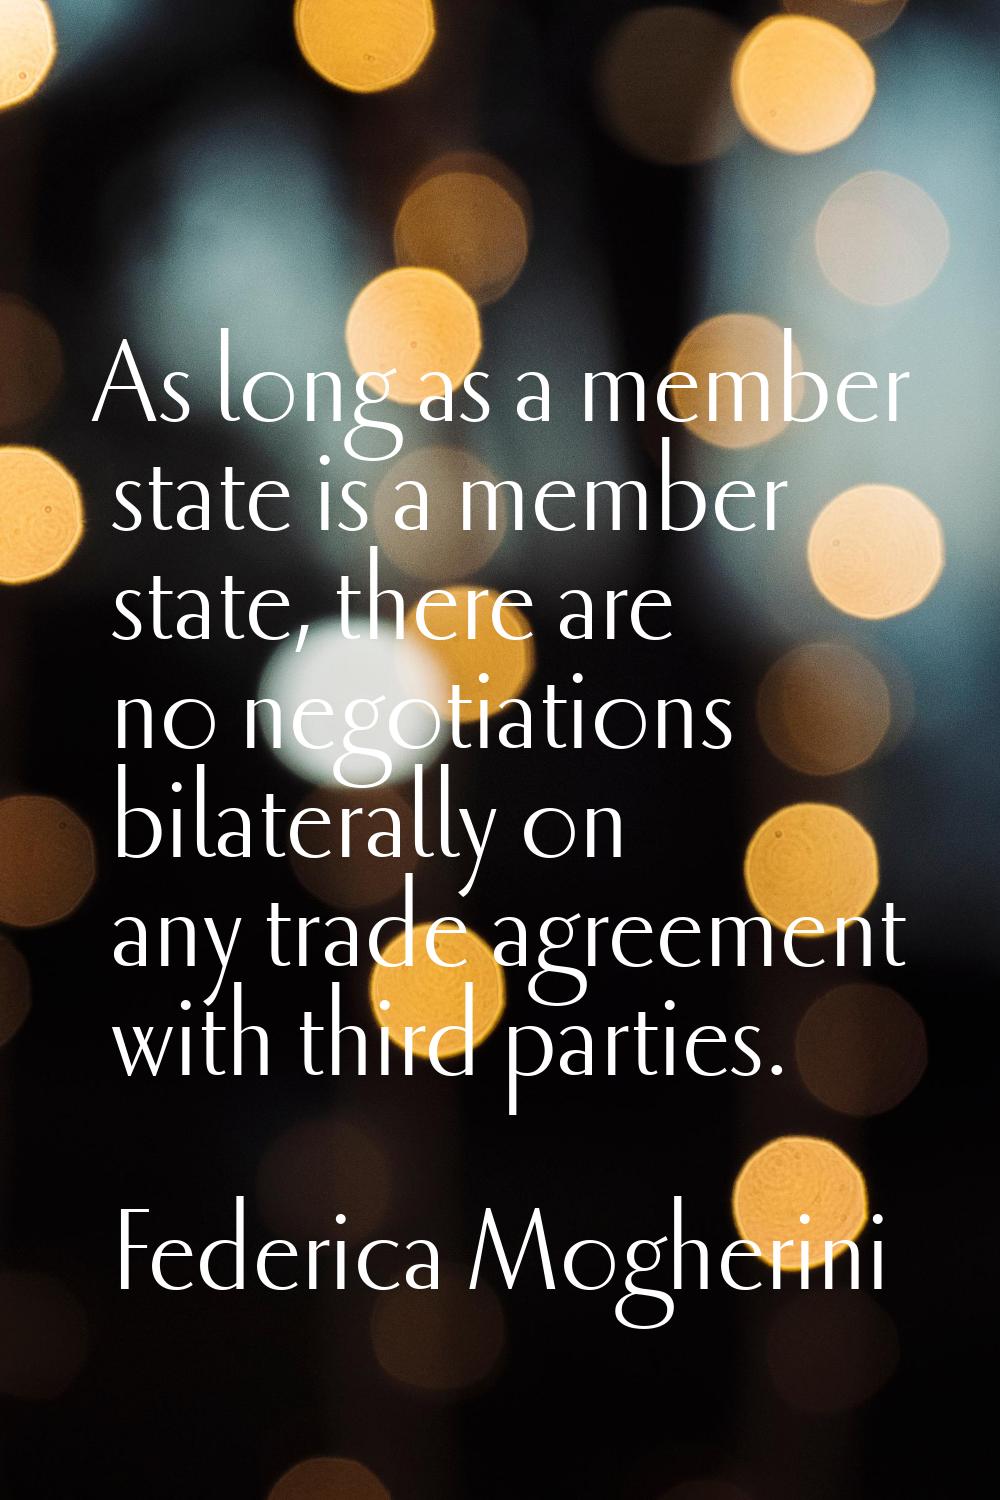 As long as a member state is a member state, there are no negotiations bilaterally on any trade agr